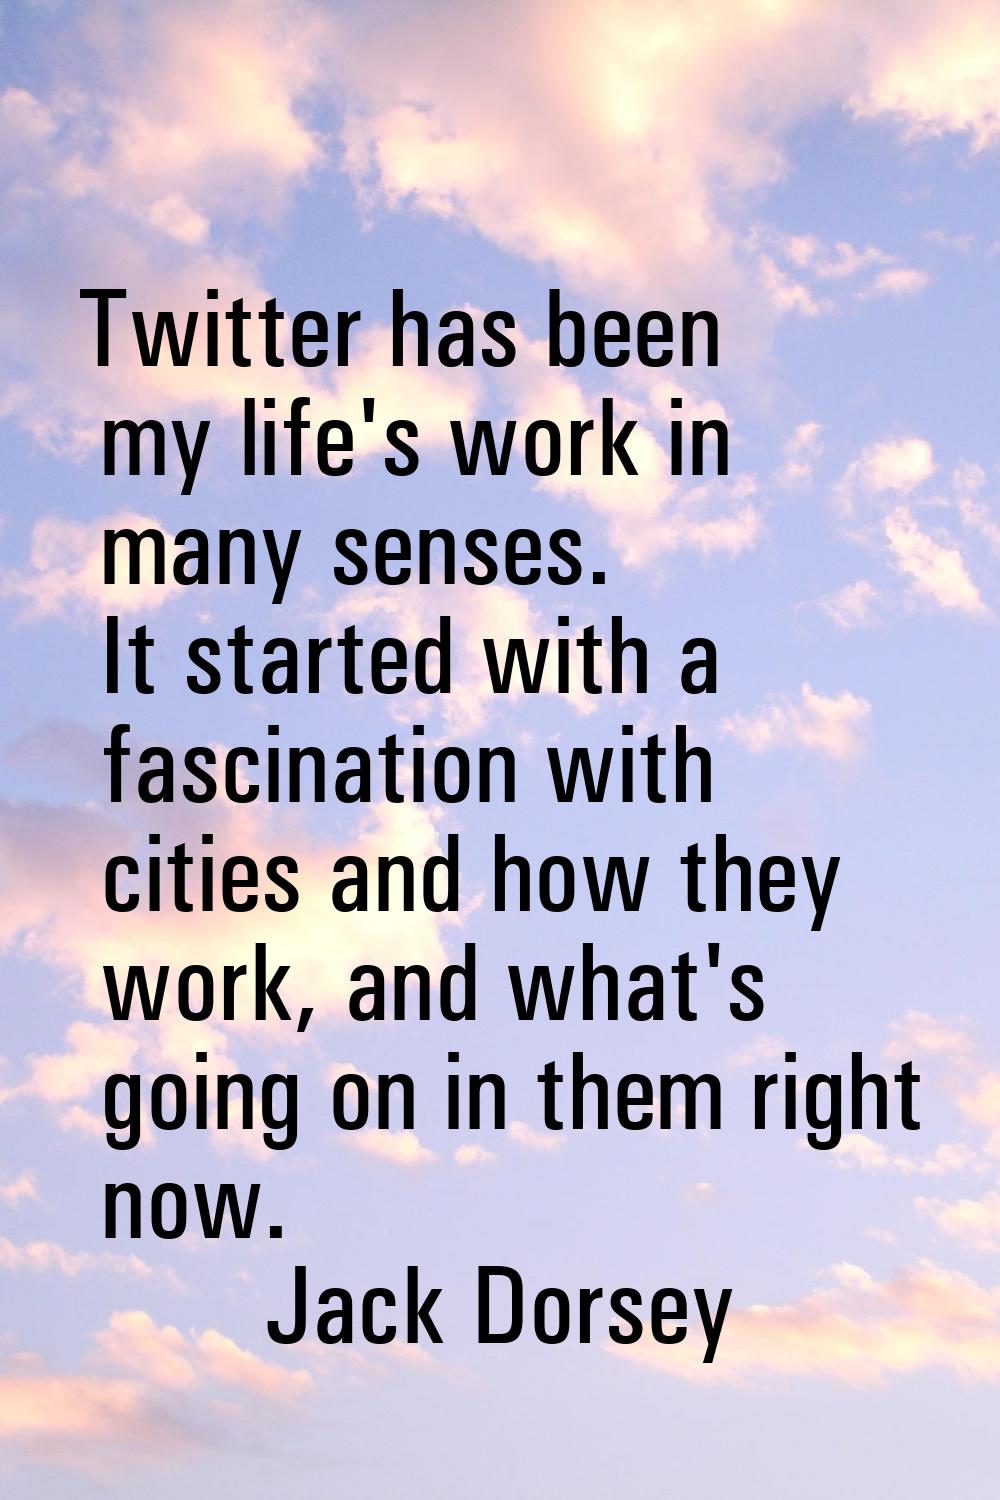 Twitter has been my life's work in many senses. It started with a fascination with cities and how t